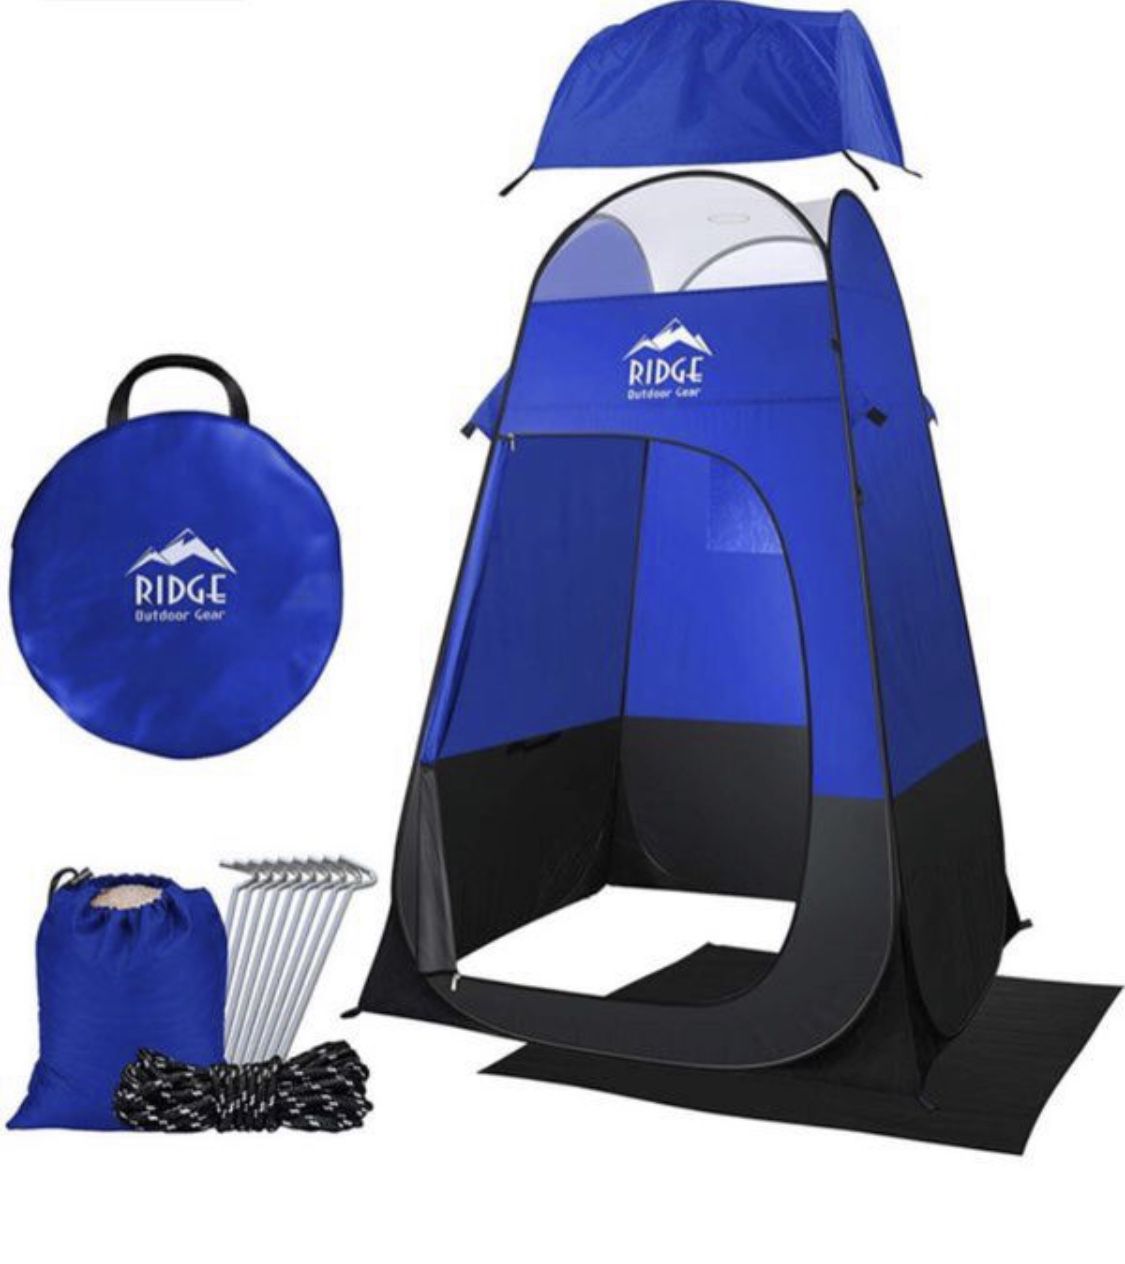 Photo Pop up shower bathroom tent for camping $35